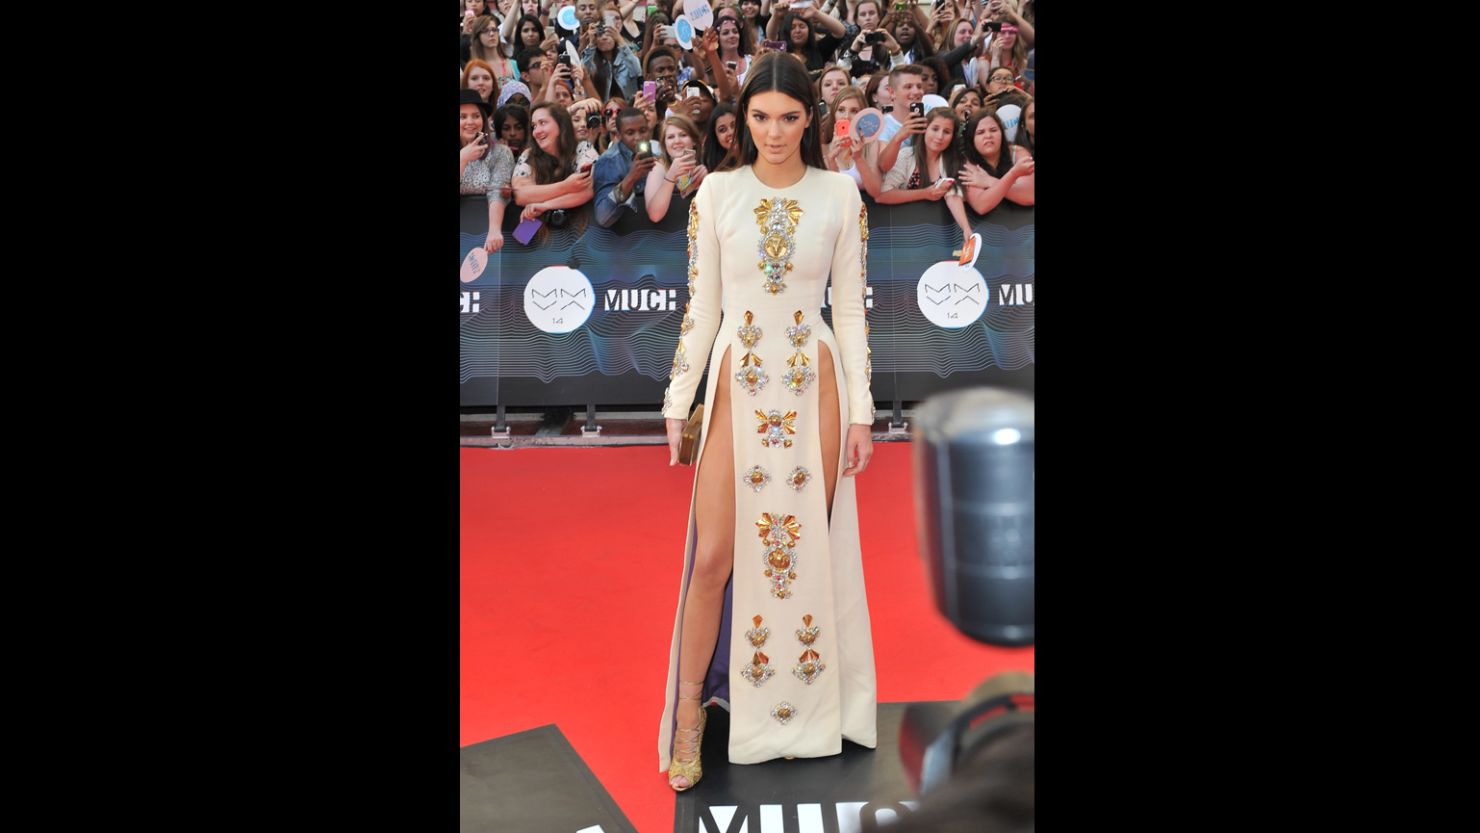 Kendall Jenner in her buzzed-about dress at the 2014 MuchMusic Video Awards on Sunday in Toronto.